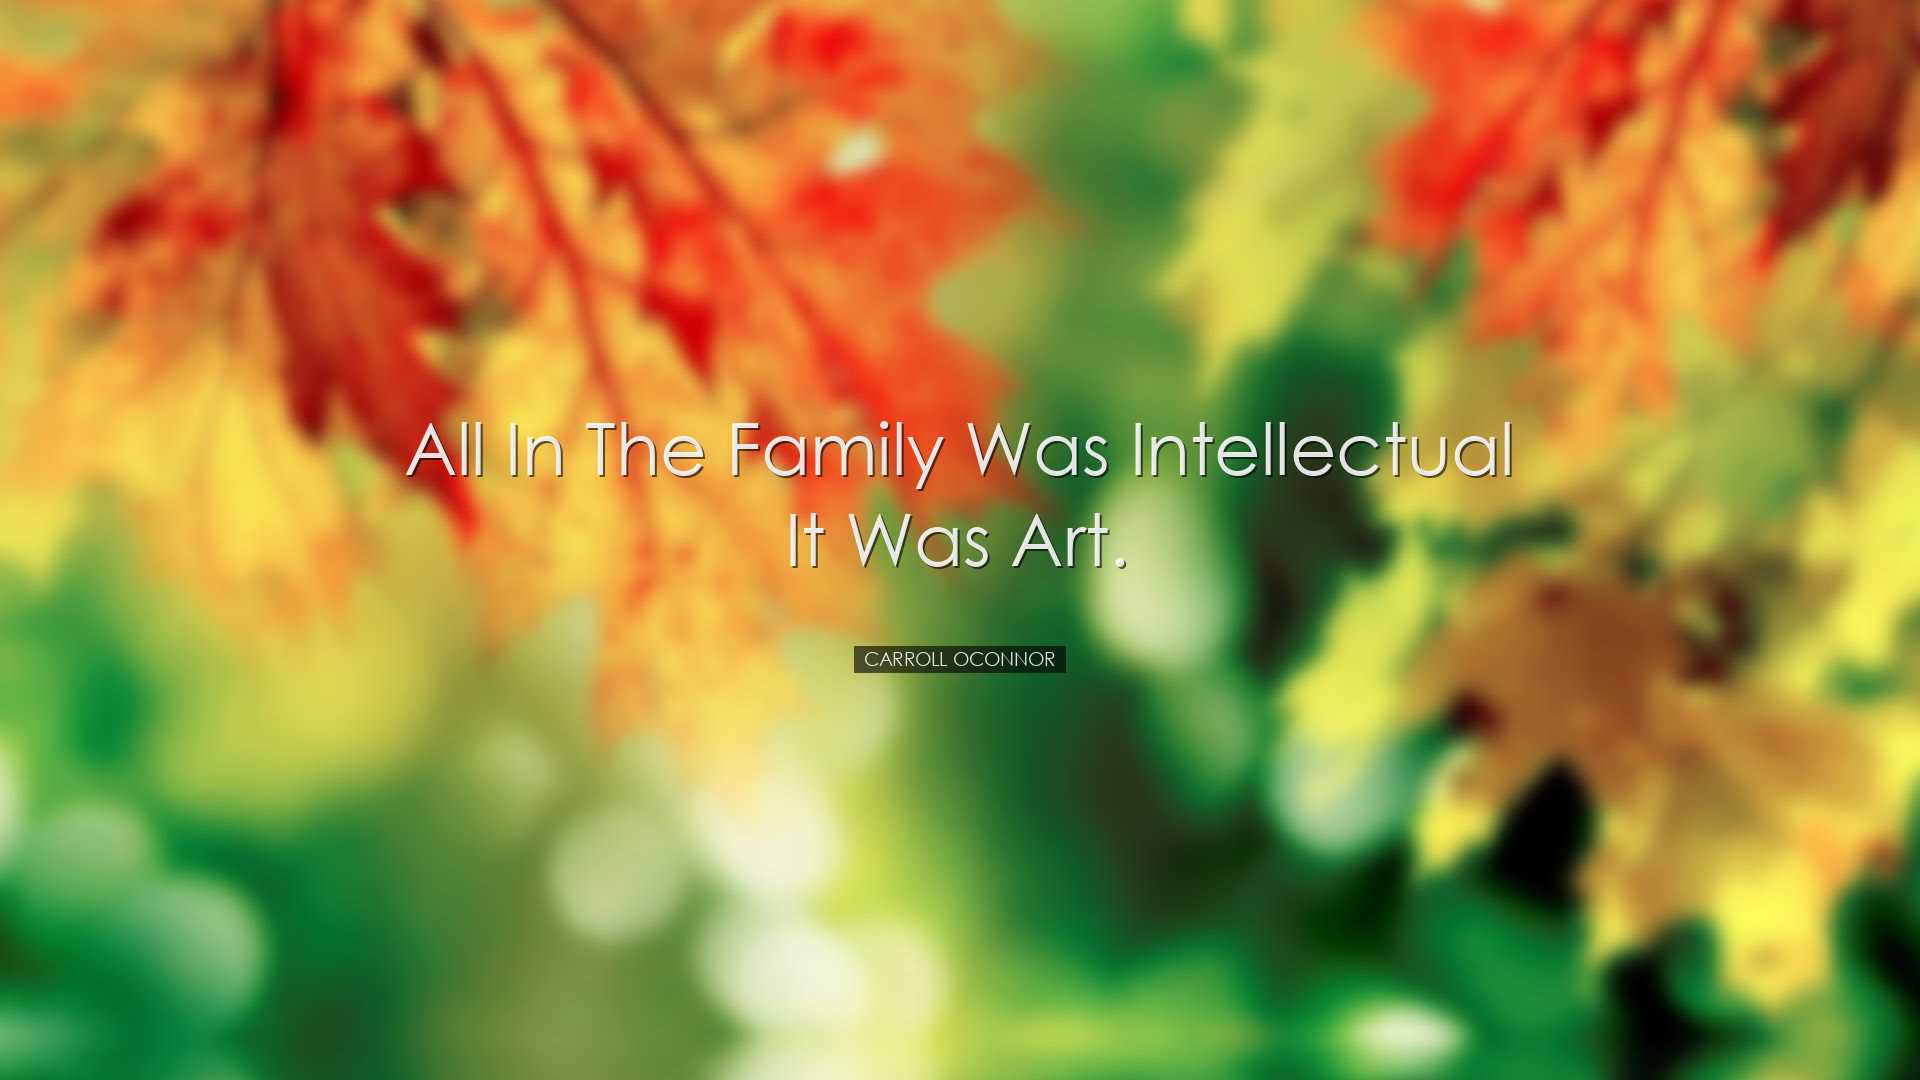 All in the Family was intellectual it was art. - Carroll OConnor